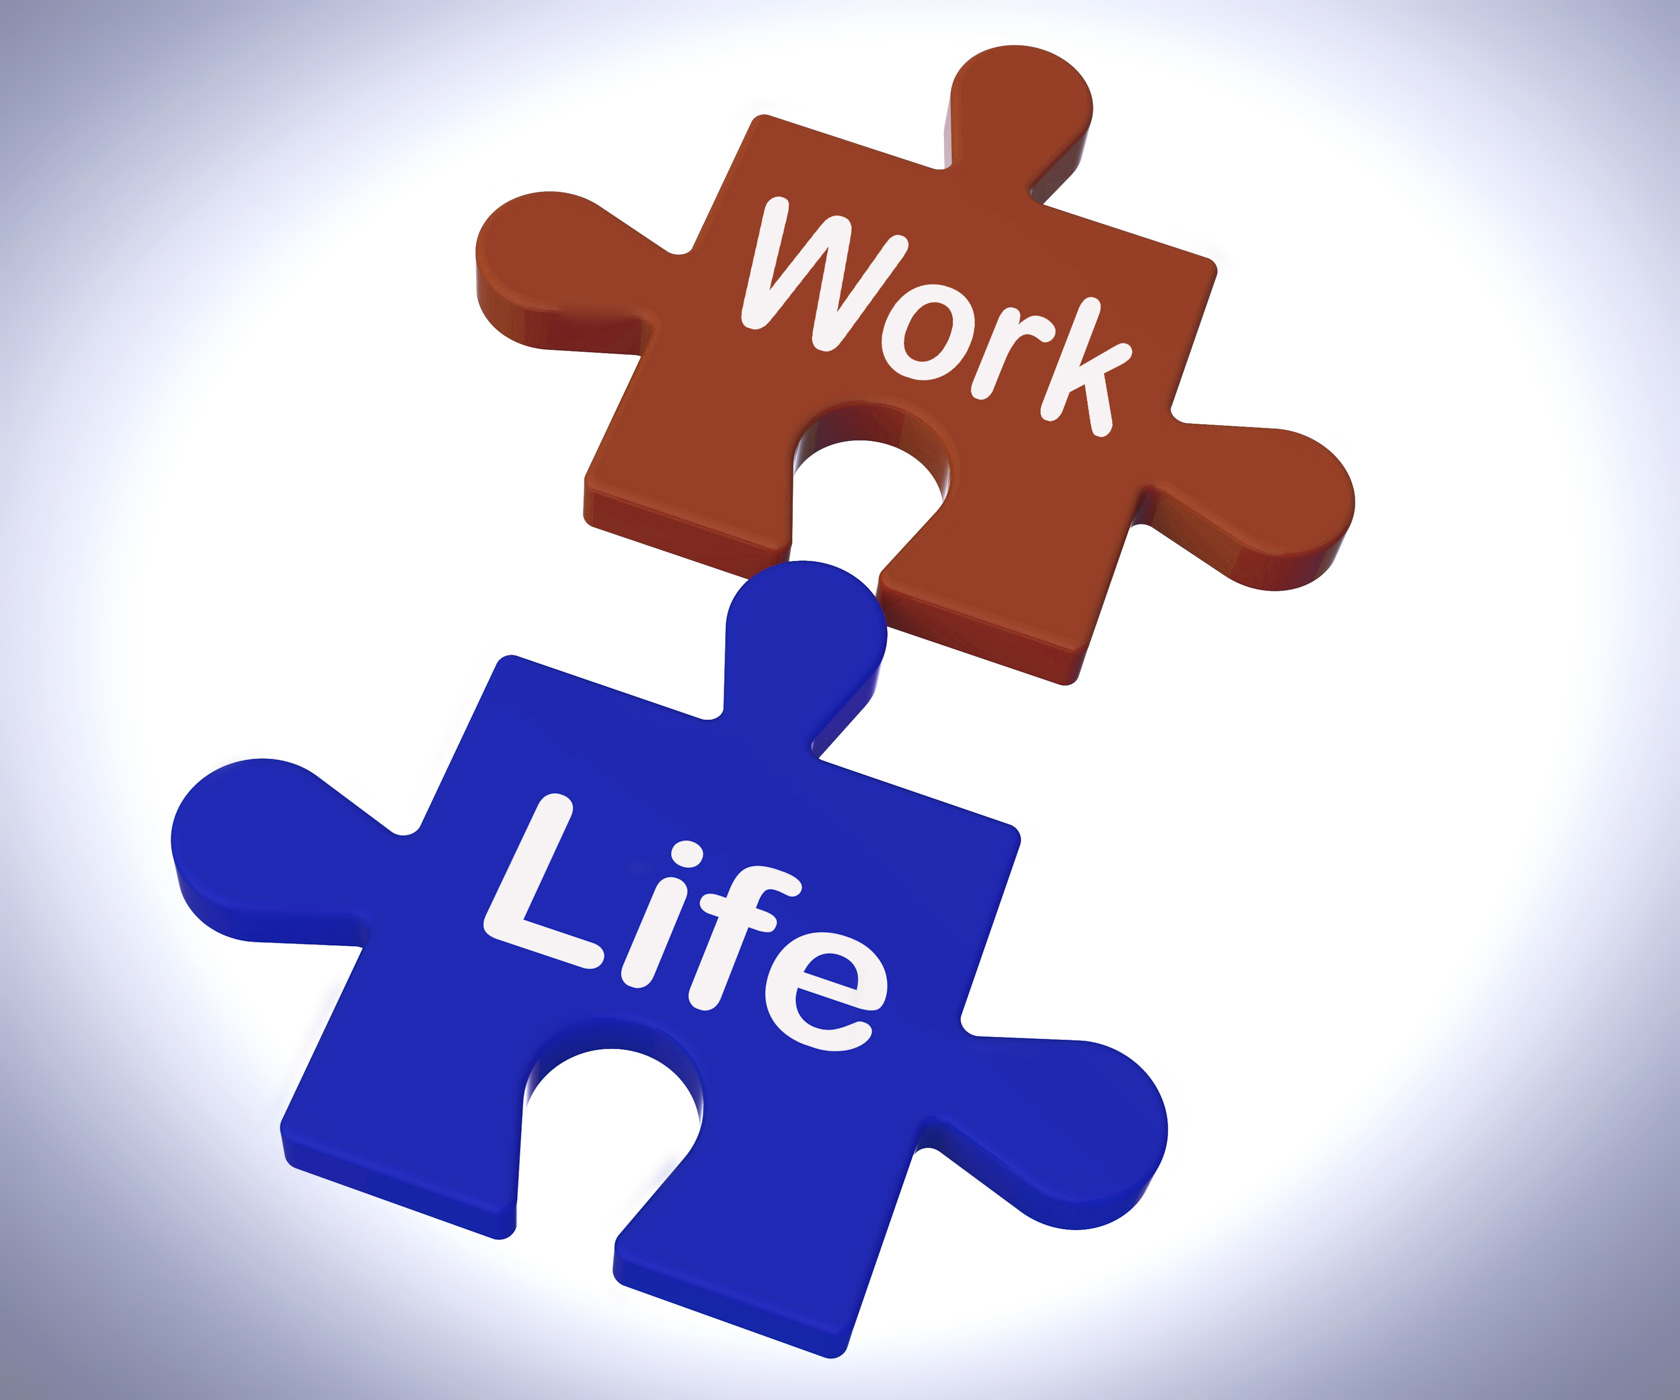 Work life puzzle shows balancing job and relaxation photo